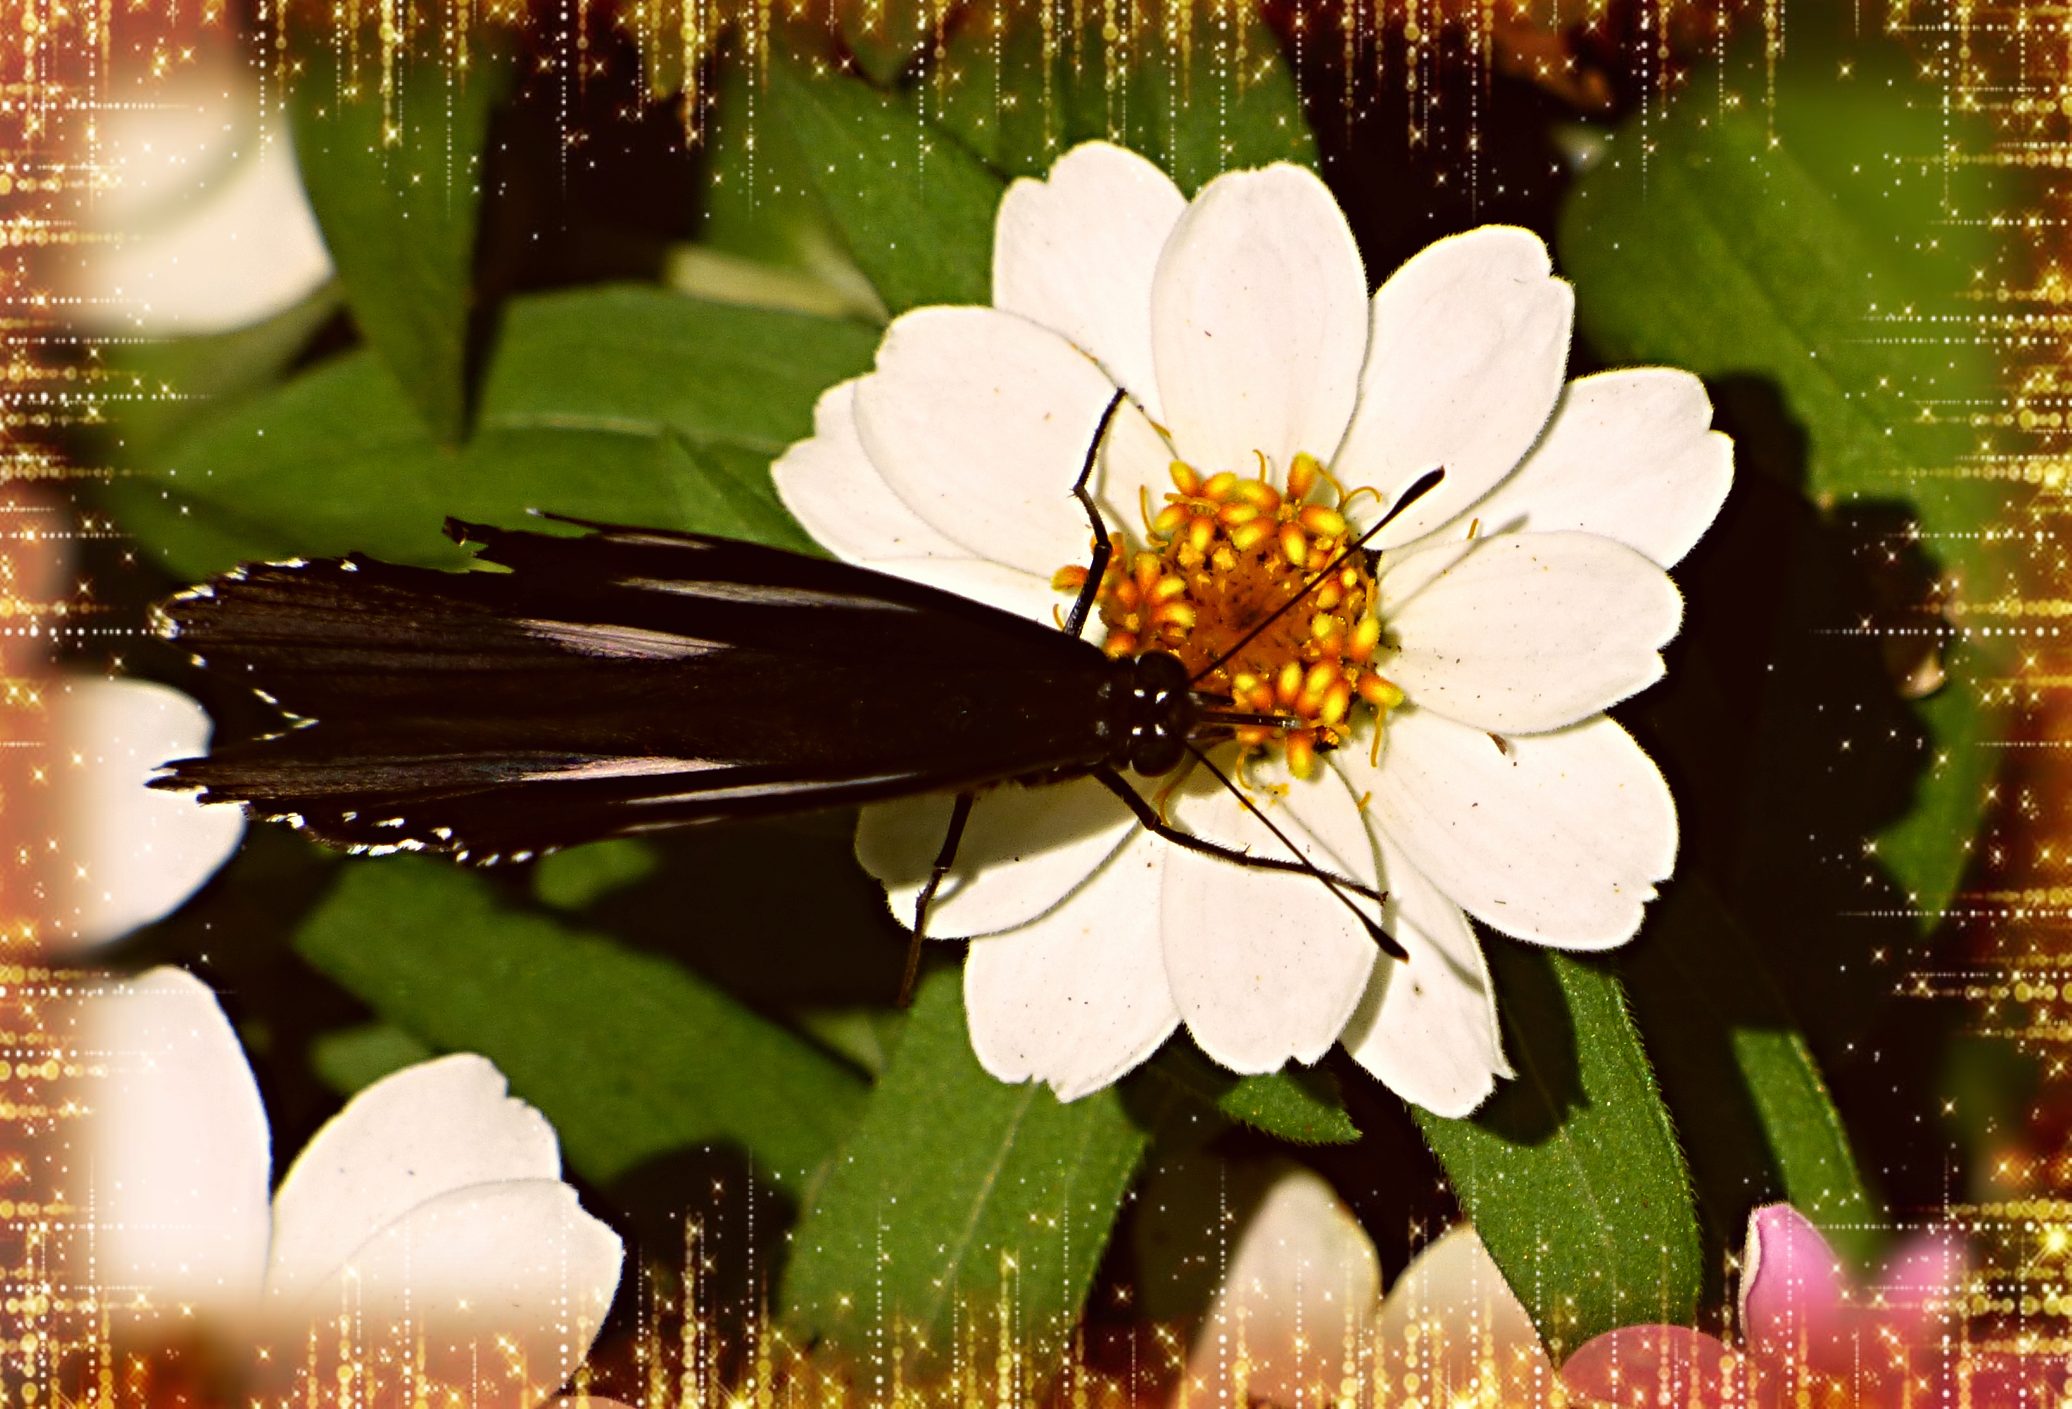 B ON WHITE FLOWER.png